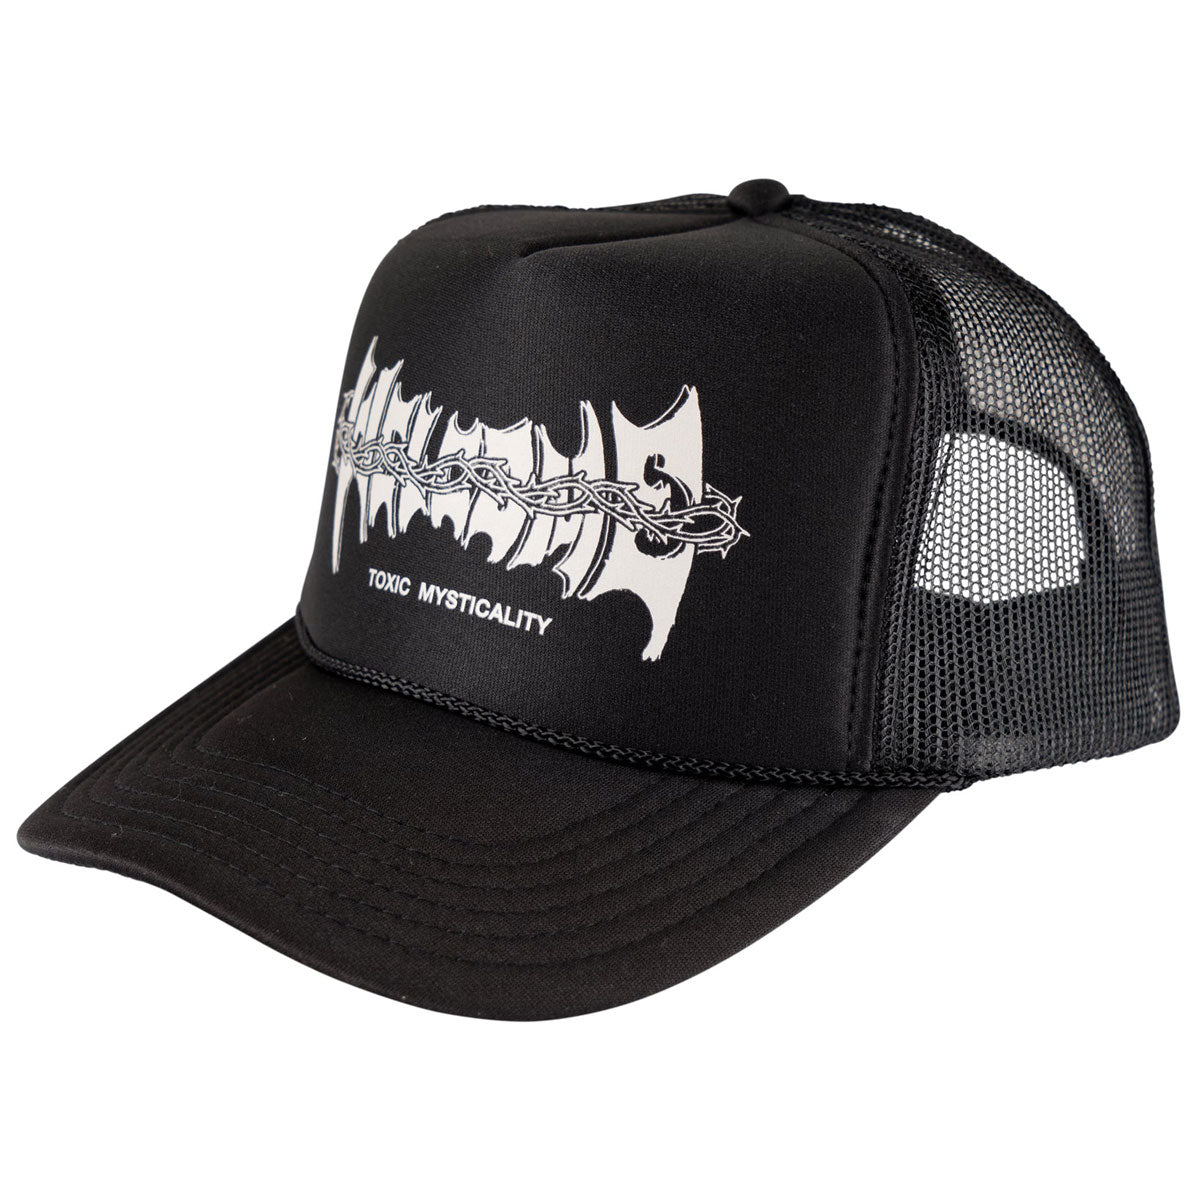 Welcome Mysticality Trucker Hat - Black image 1